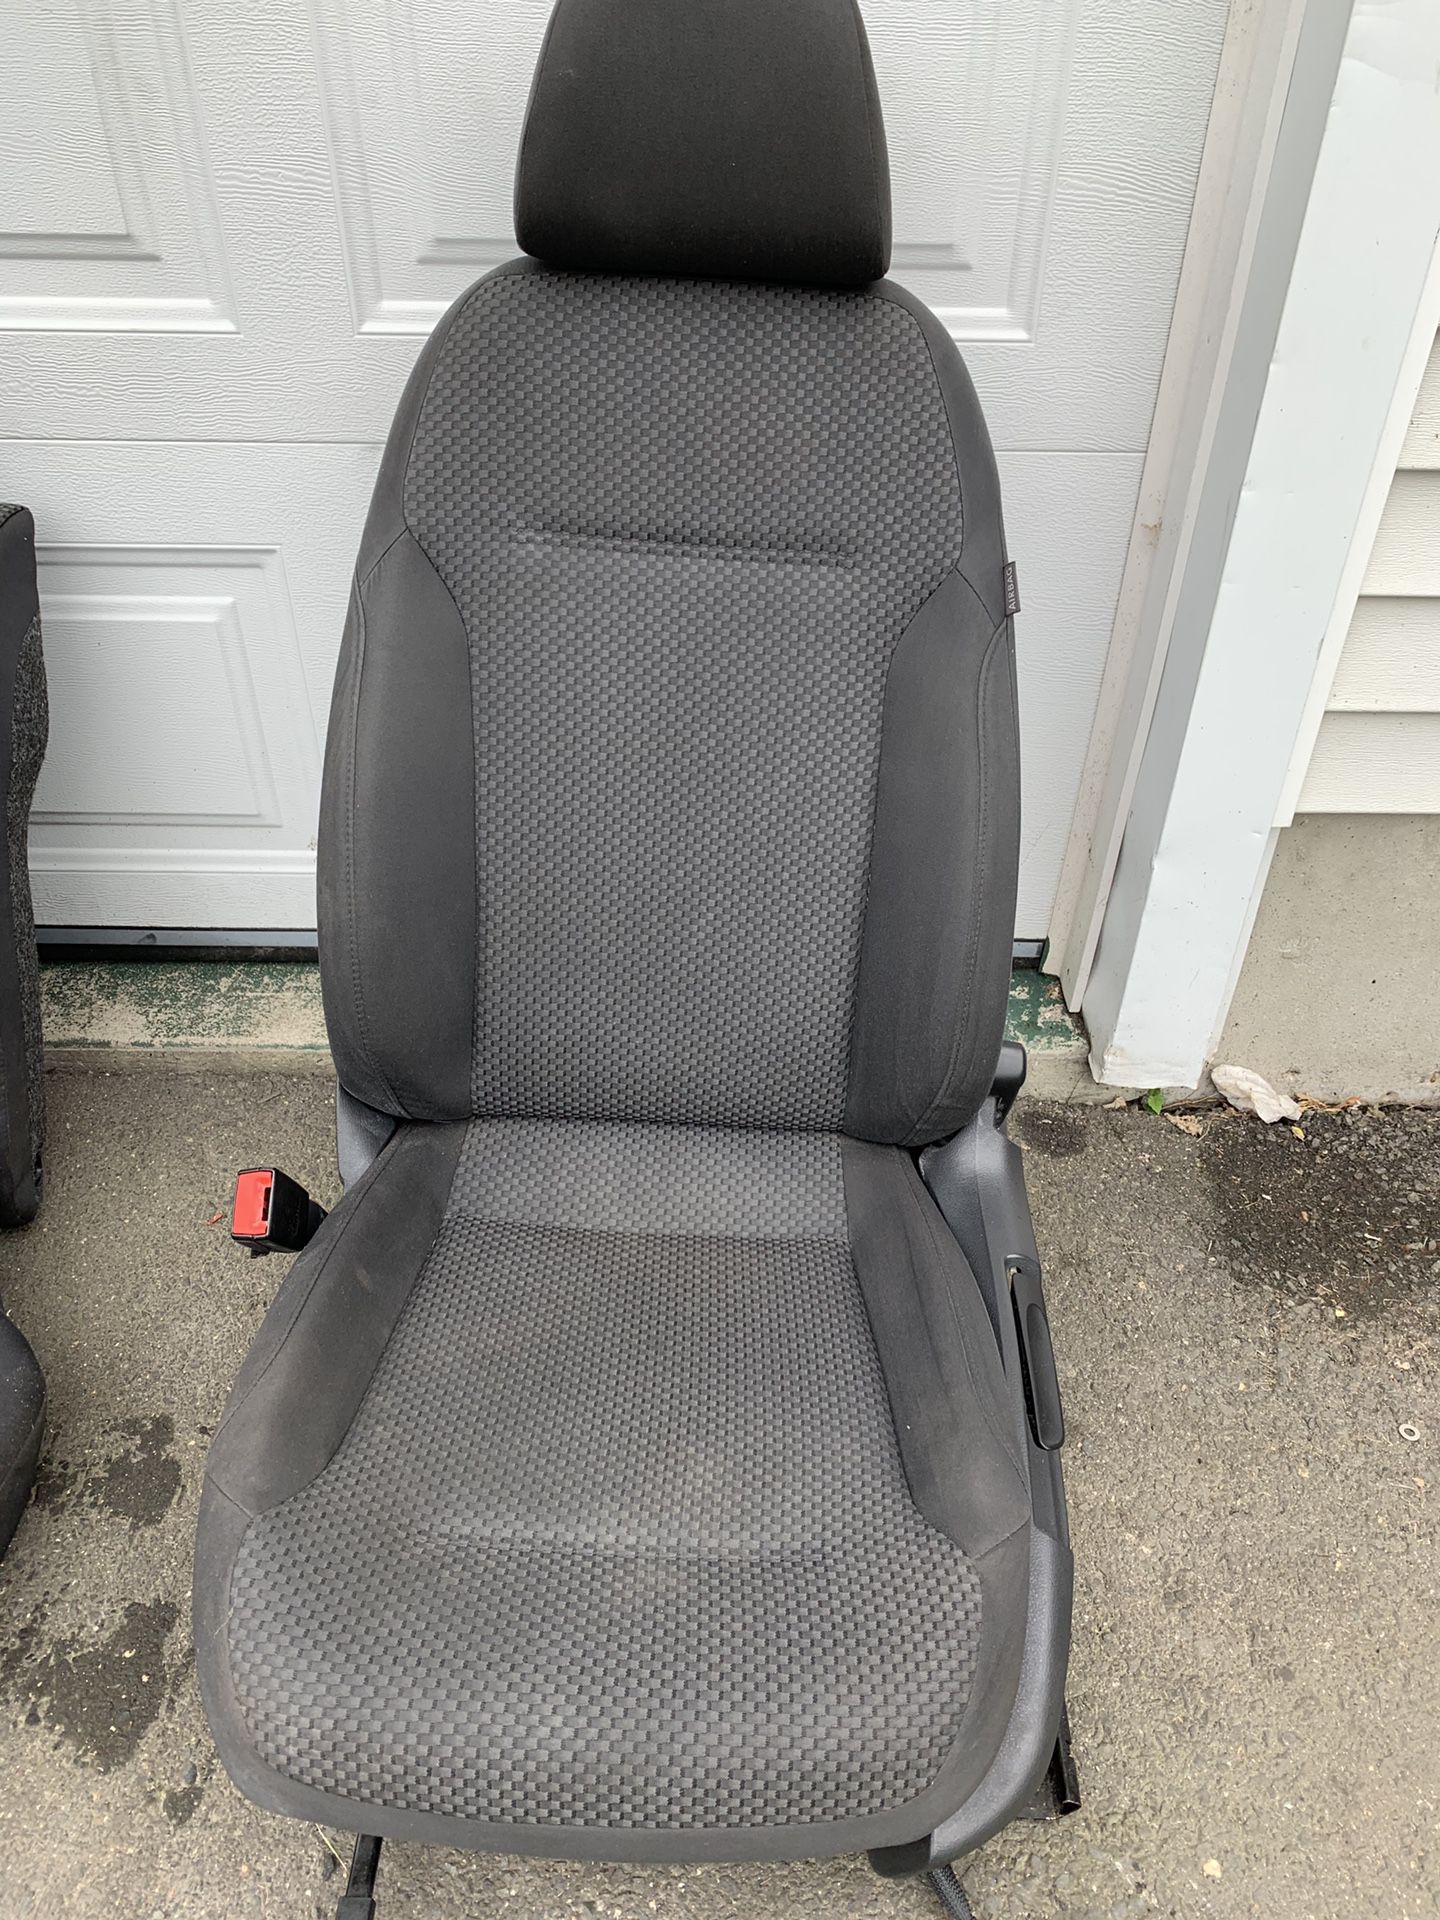 FREE FREE FREE!!!!! 2012 Volkswagen JETTA S front and rear seats NEED GONE!!